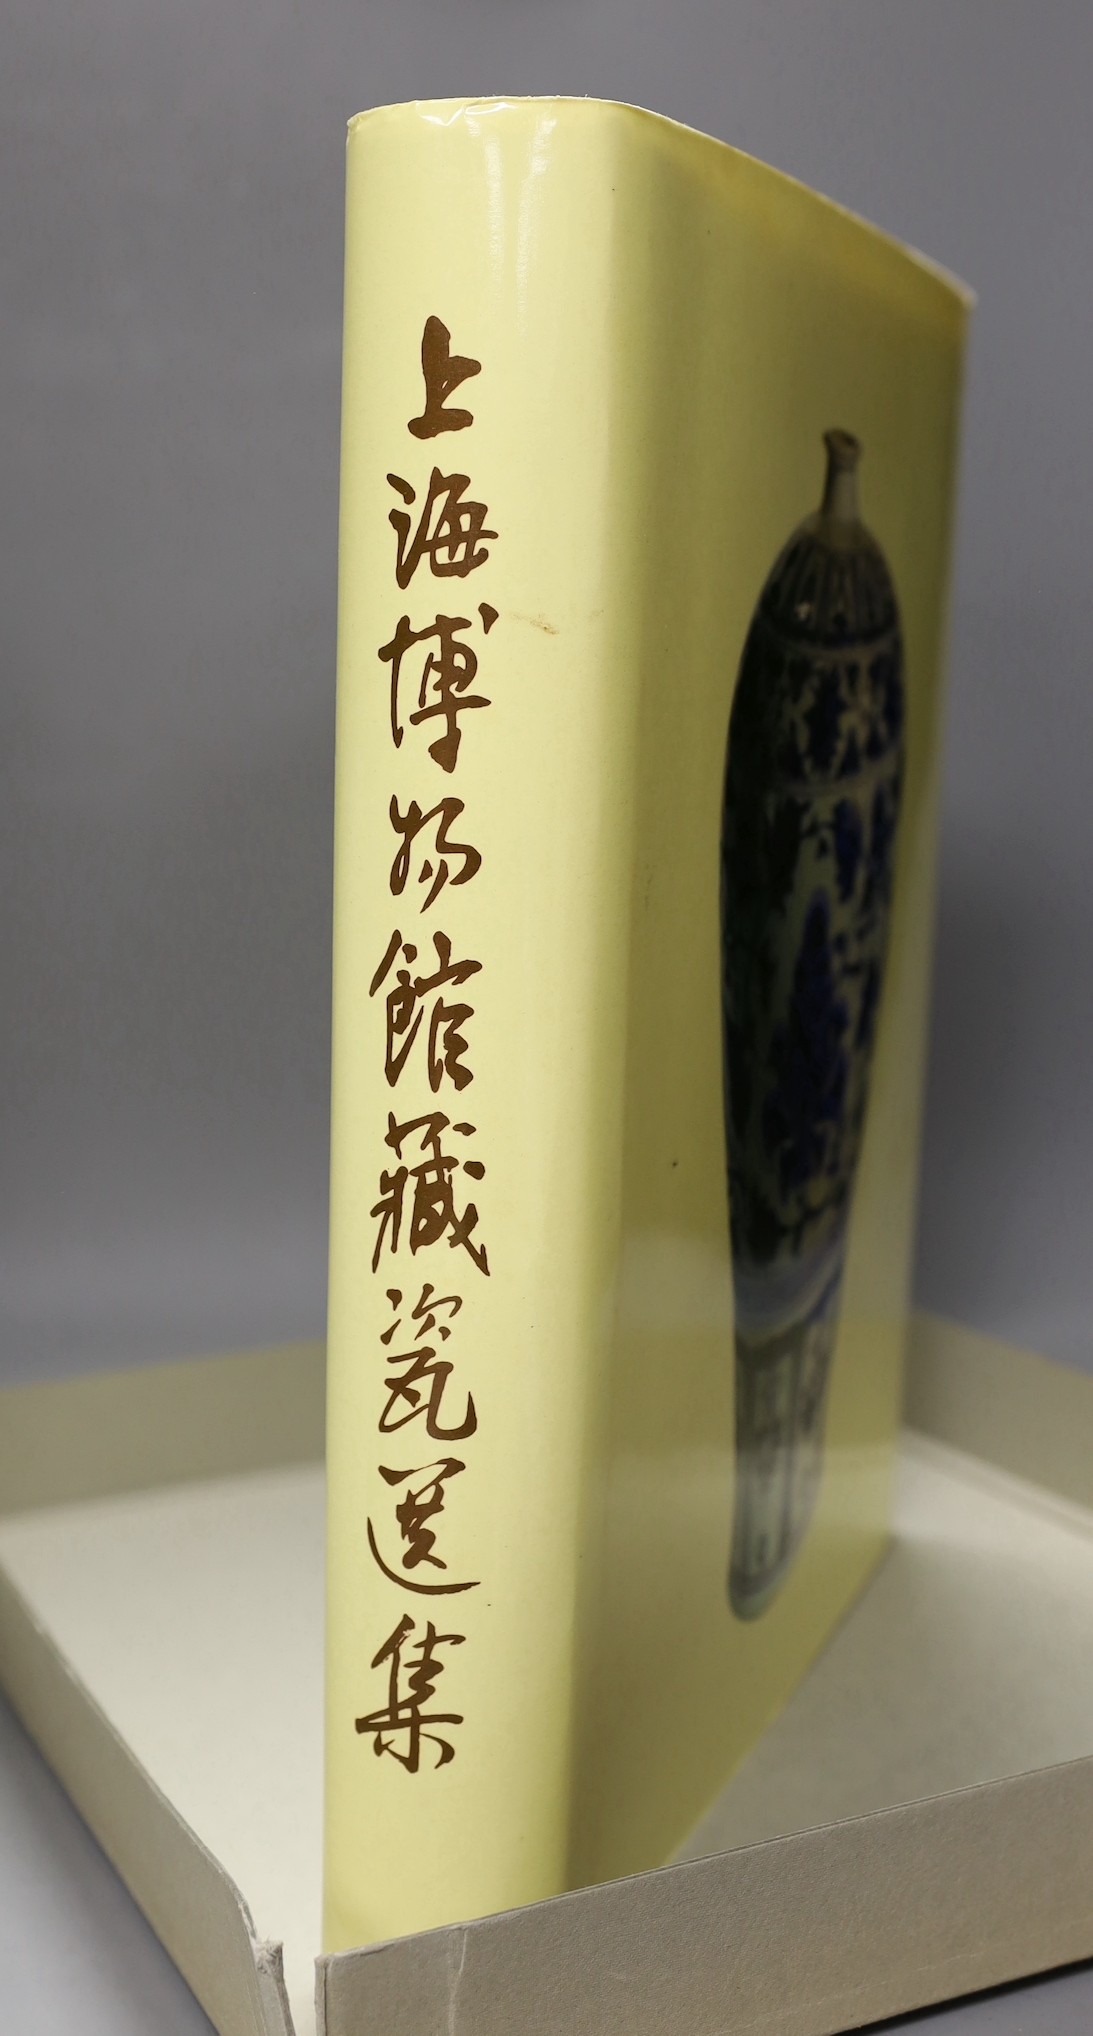 Shanghai Museum collection of Chinese ceramics, published 1979